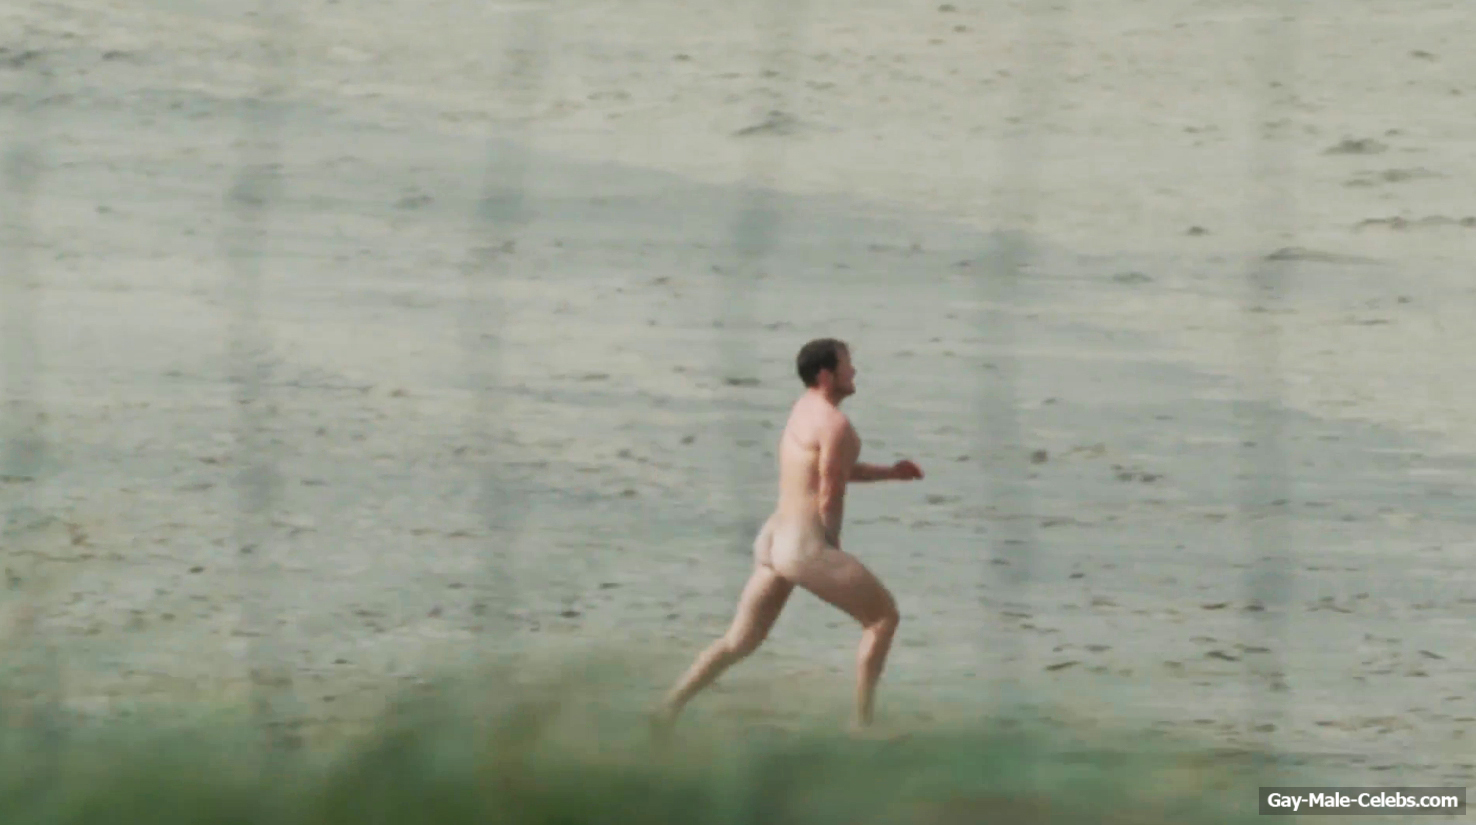 Sam Heughan Shakes His Naked Ass While Running